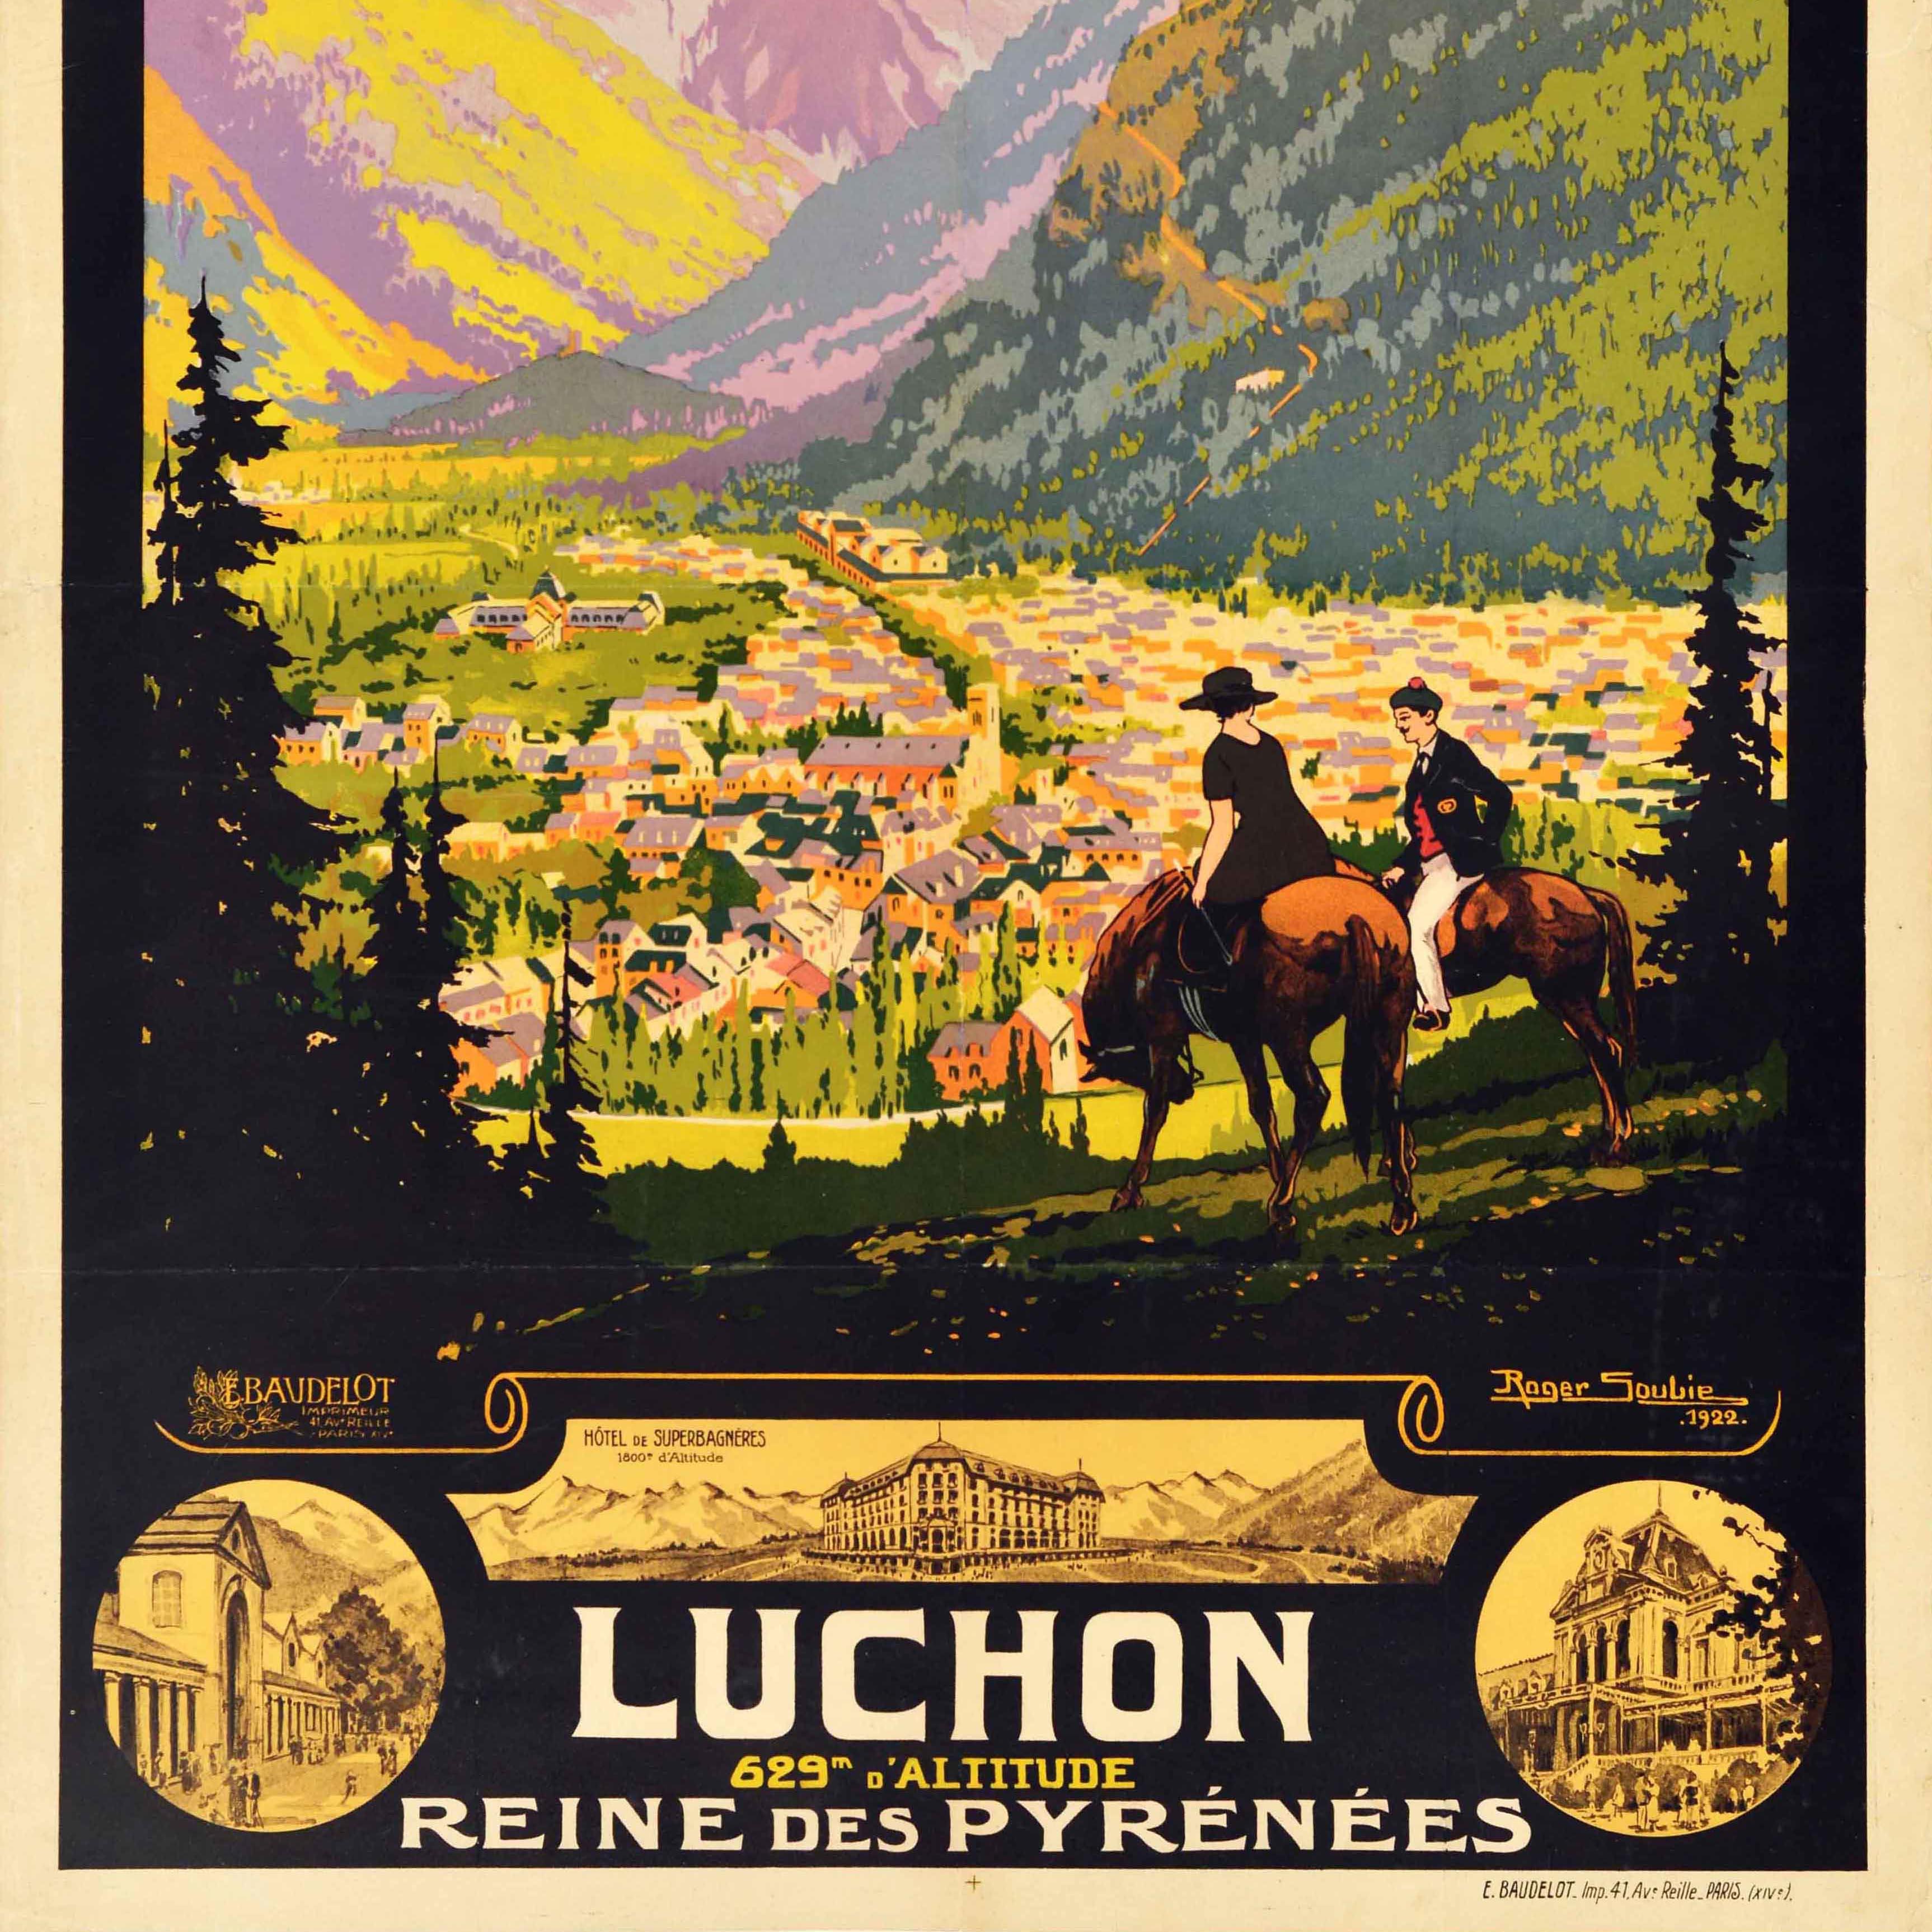 Early 20th Century Original Antique Travel Poster Luchon Pyrenees Orleans Midi Railways Soubie Art For Sale